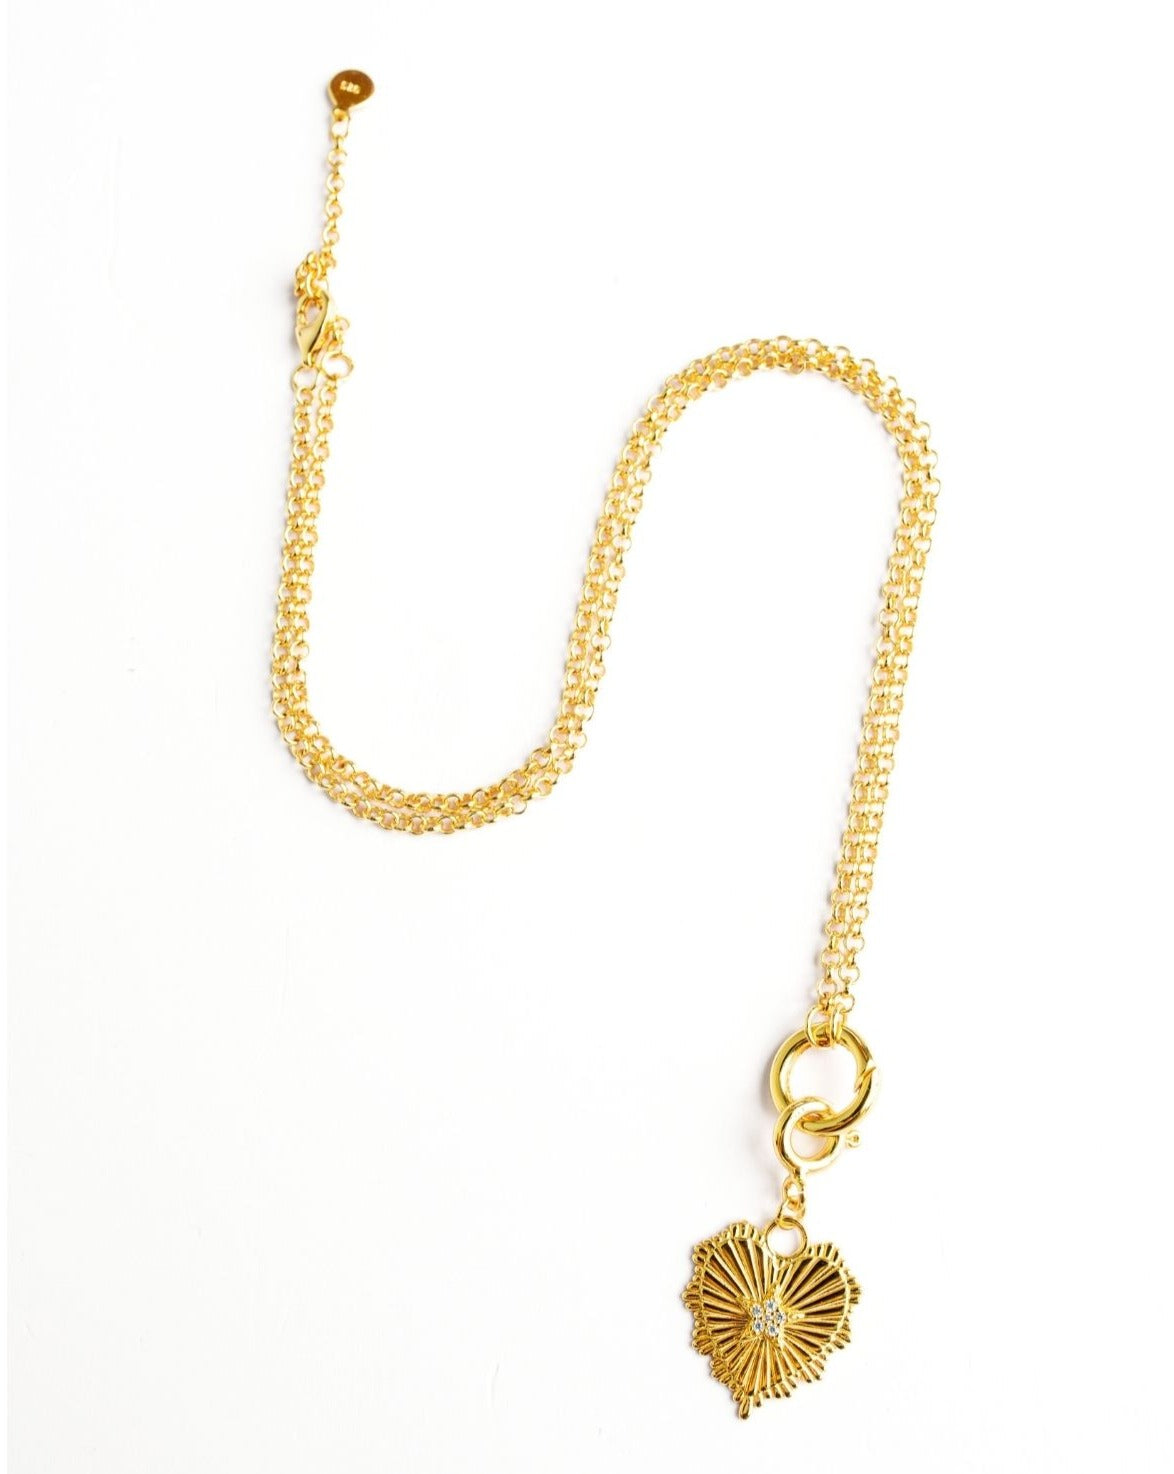 New Rolo Chain Necklace With Charm